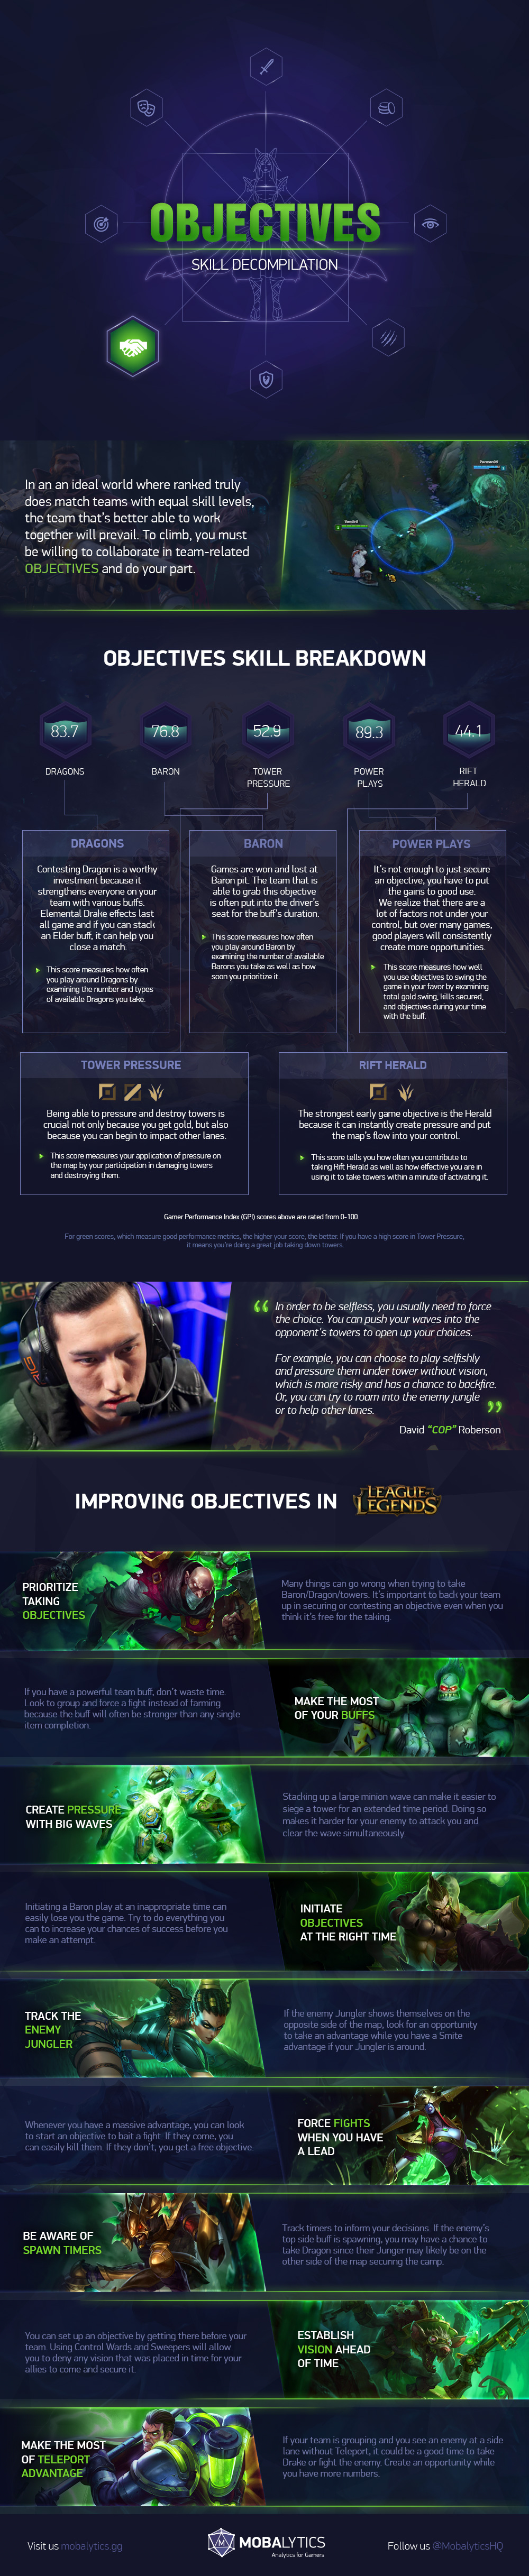 Objectives 2018 Infographic